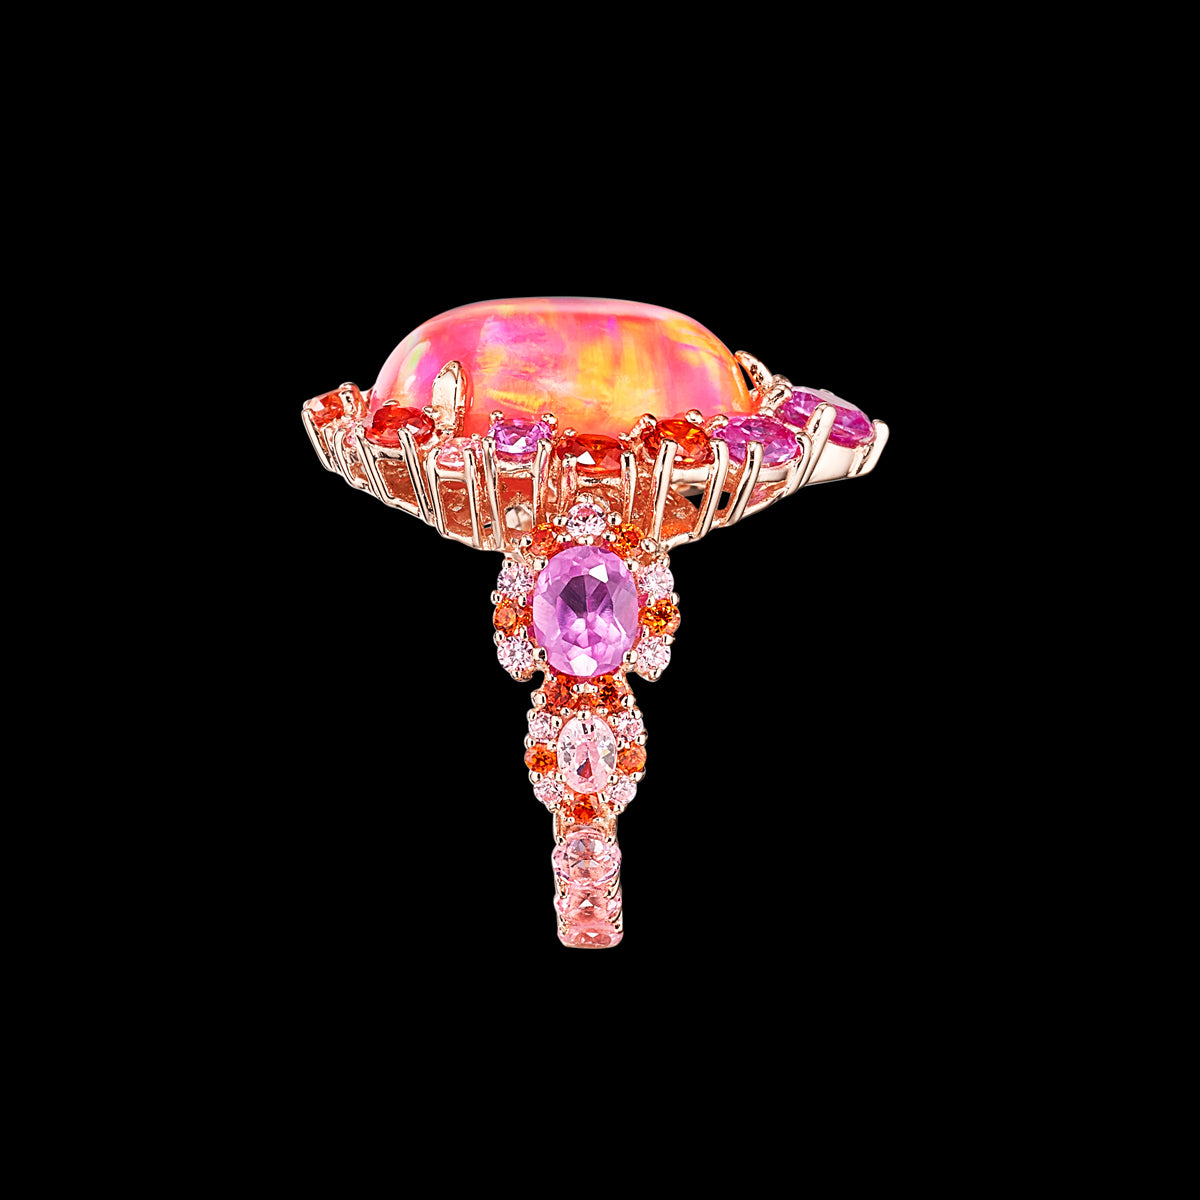 Coral Opal Ocean Rings, Ring, Anabela Chan Joaillerie - Fine jewelry with laboratory grown and created gemstones hand-crafted in the United Kingdom. Anabela Chan Joaillerie is the first fine jewellery brand in the world to champion laboratory-grown and created gemstones with high jewellery design, artisanal craftsmanship and a focus on ethical and sustainable innovations.